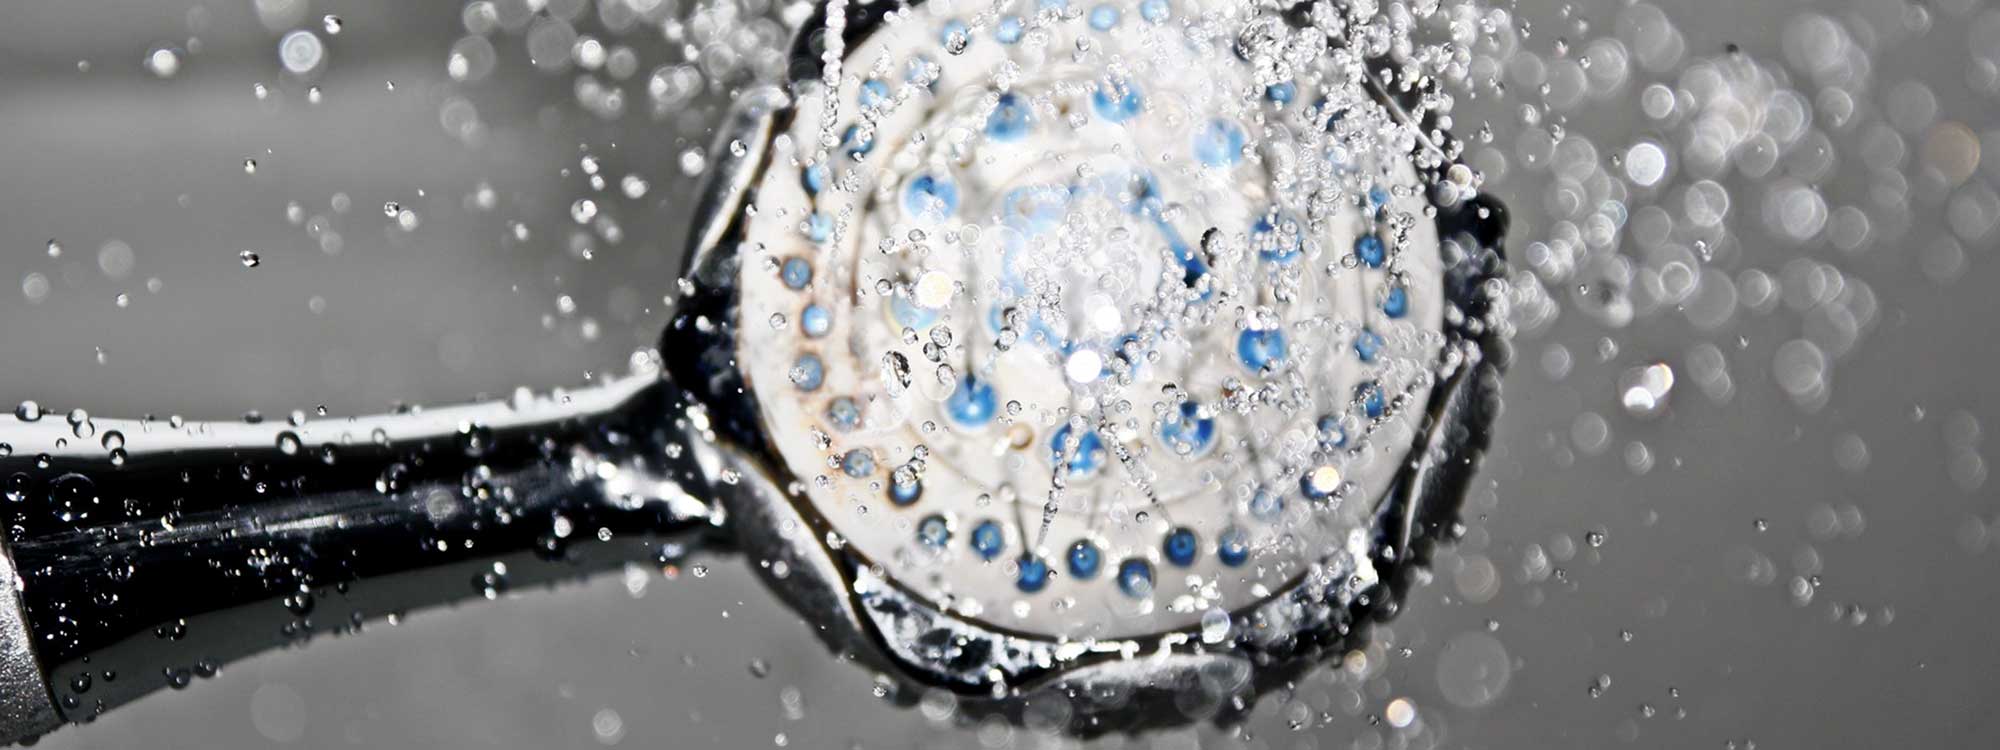 Save 25-60% of your water consumption by adjusting your shower head or buying a new one.